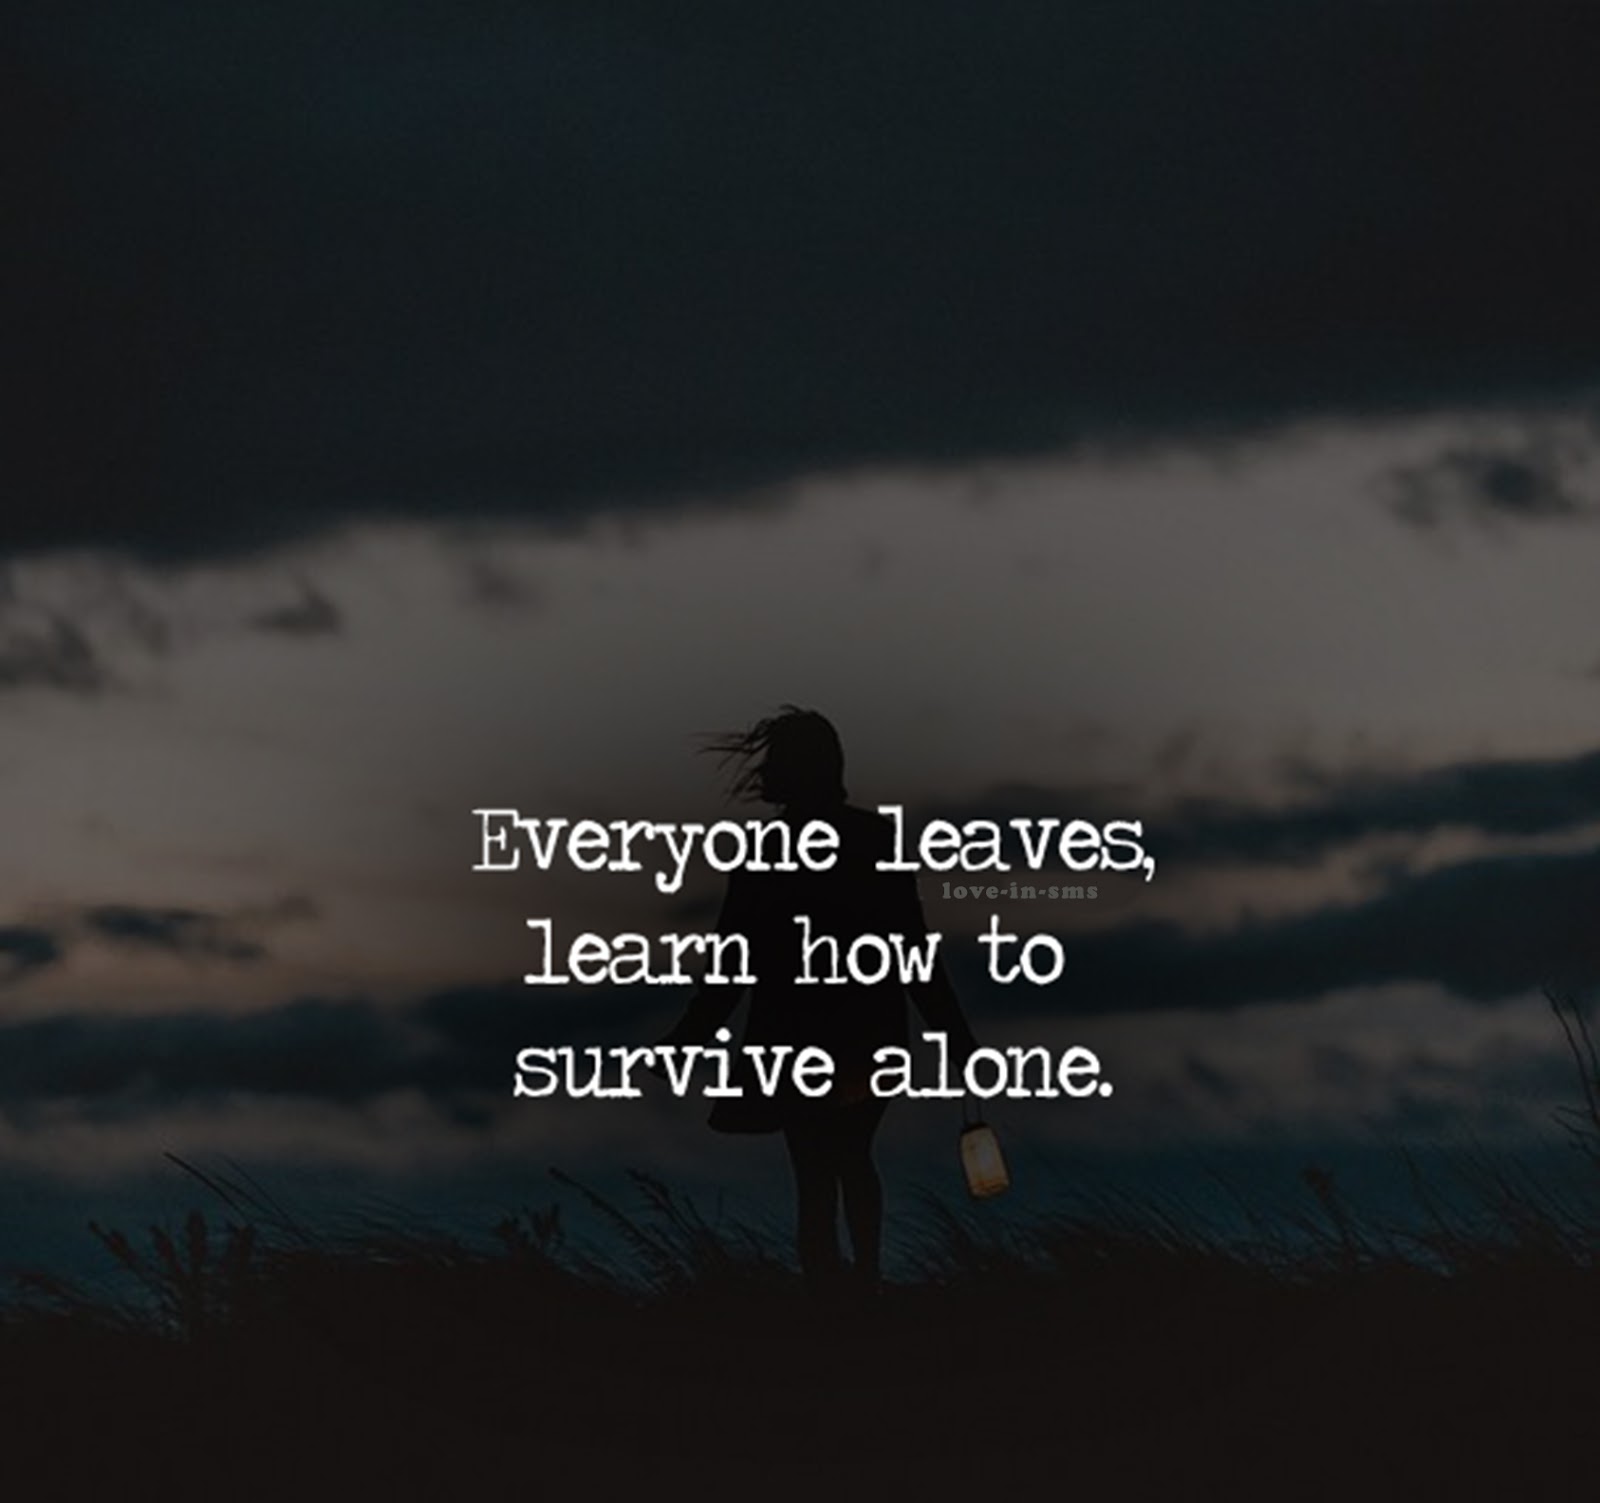 everyone leaves, learn how to survive alone